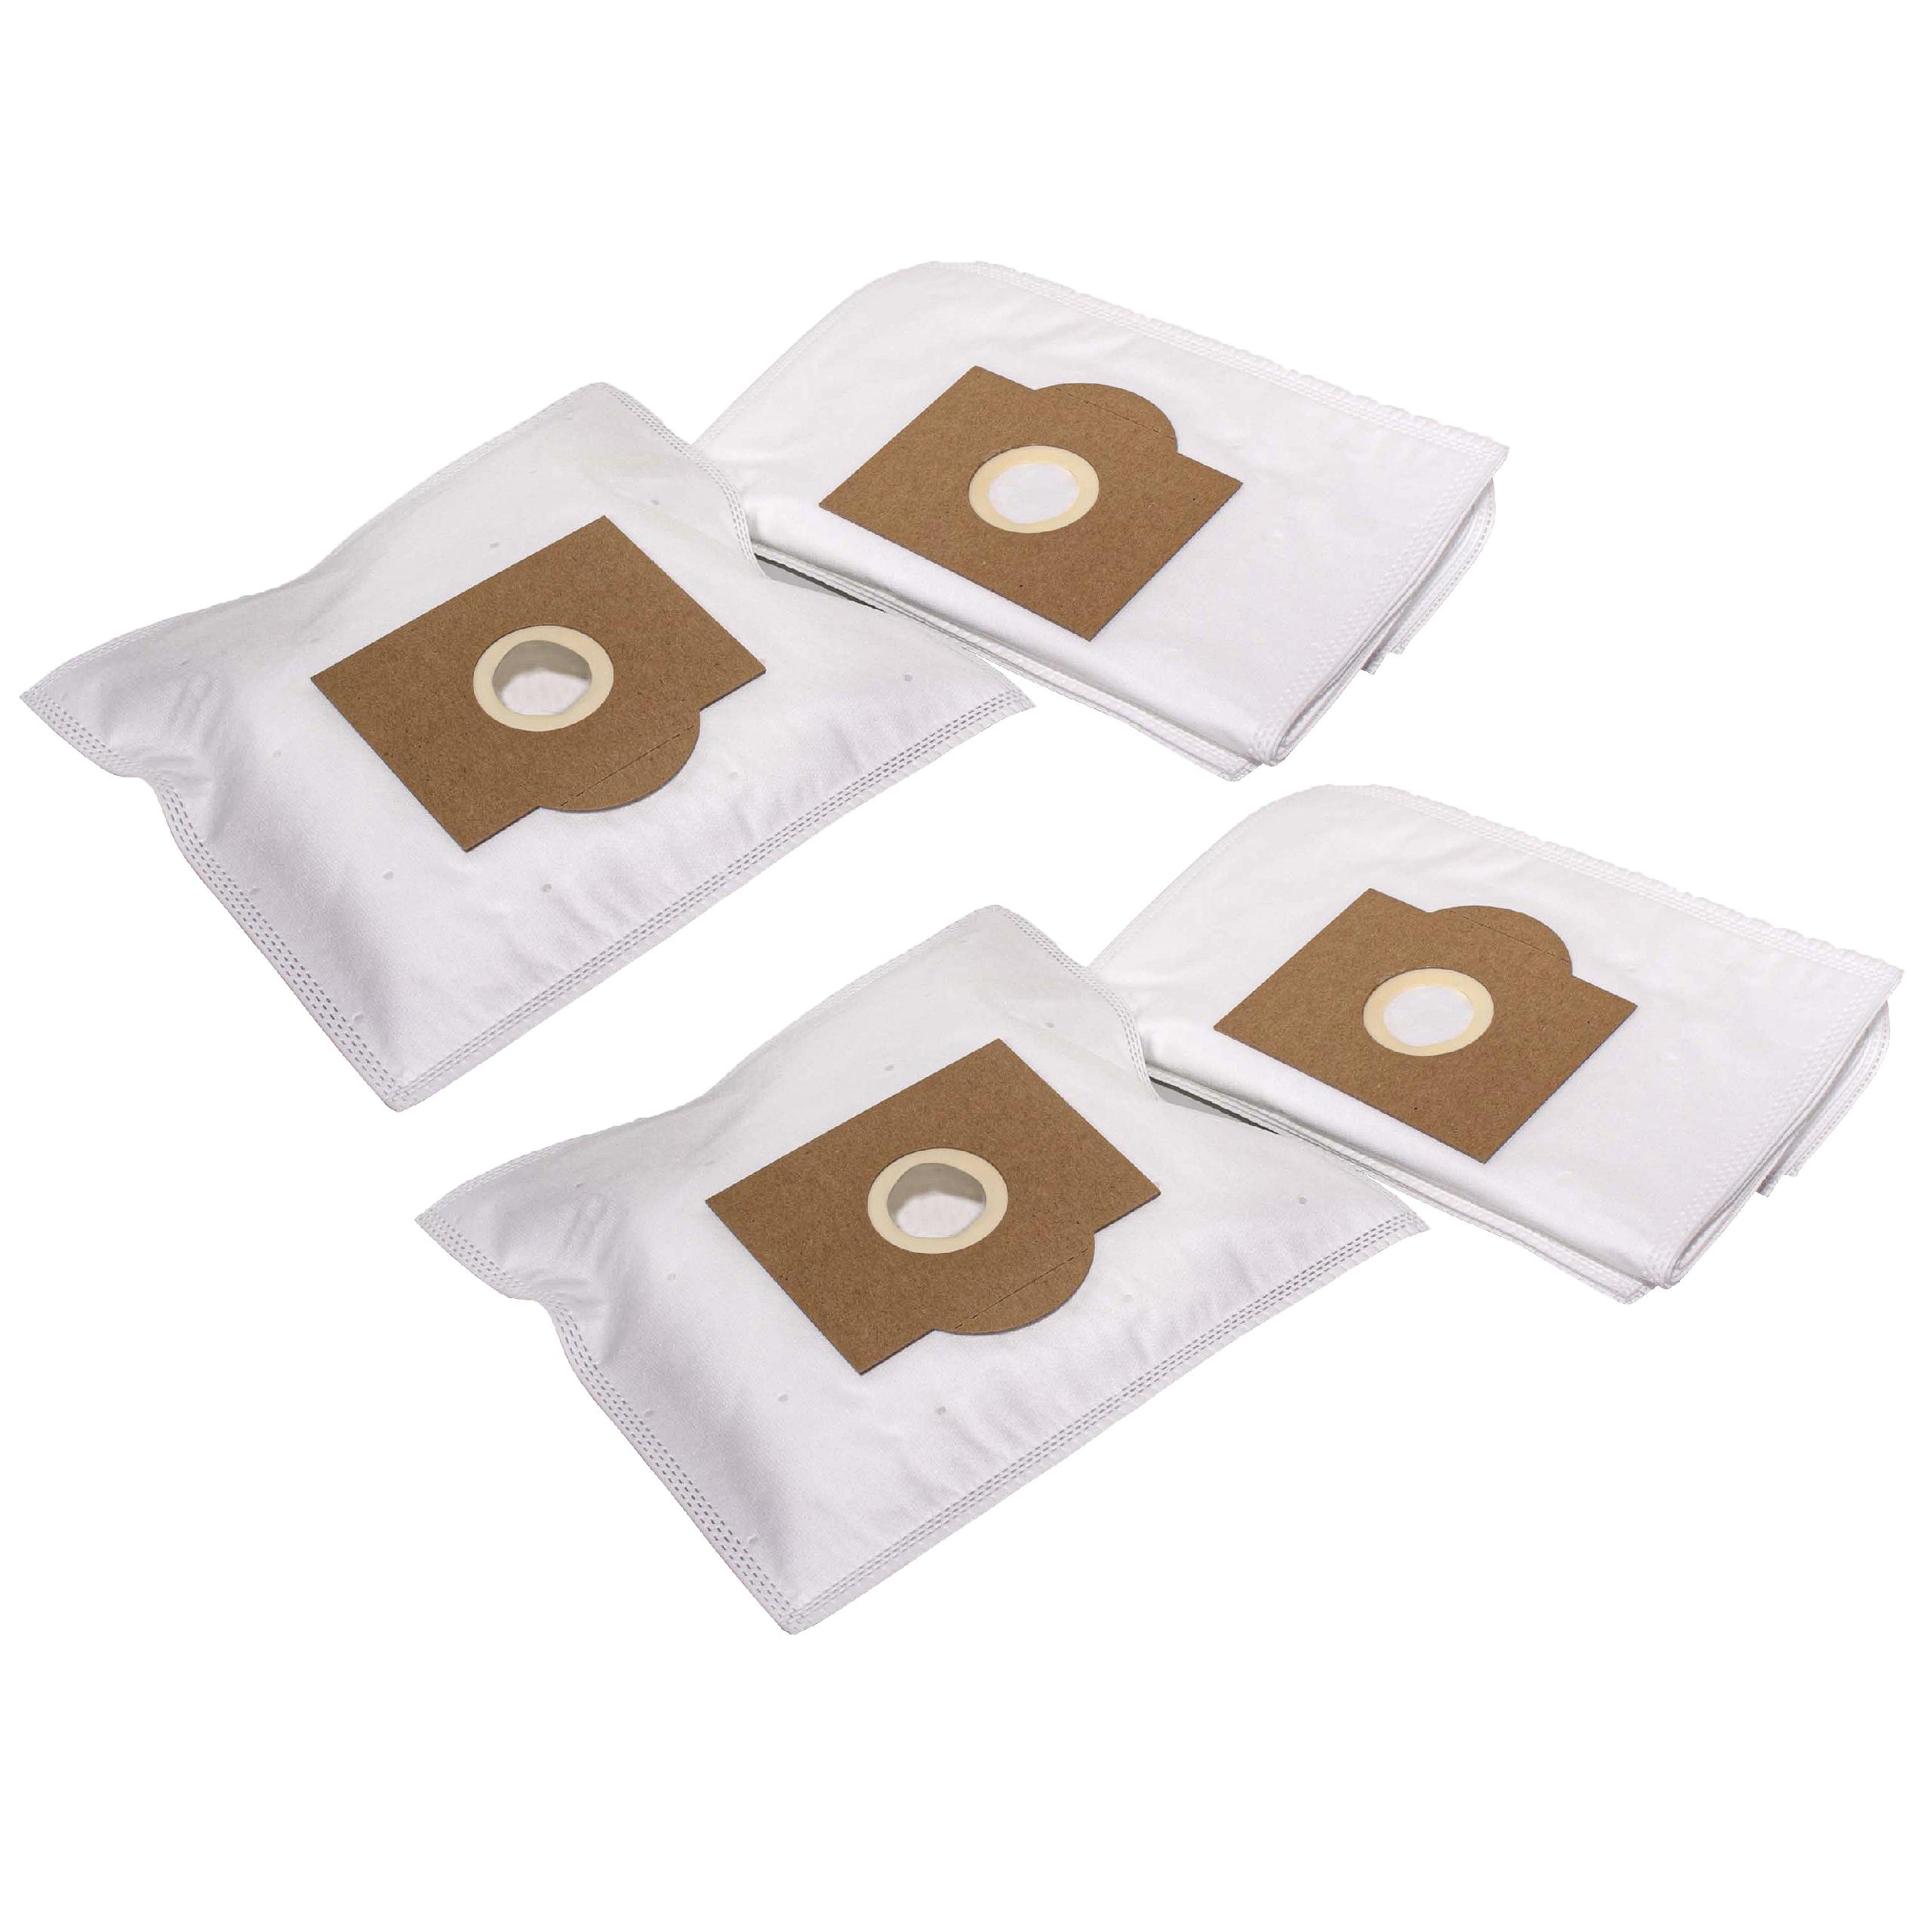 20x Vacuum Cleaner Bag replaces Menalux T035 for Compact - microfleece